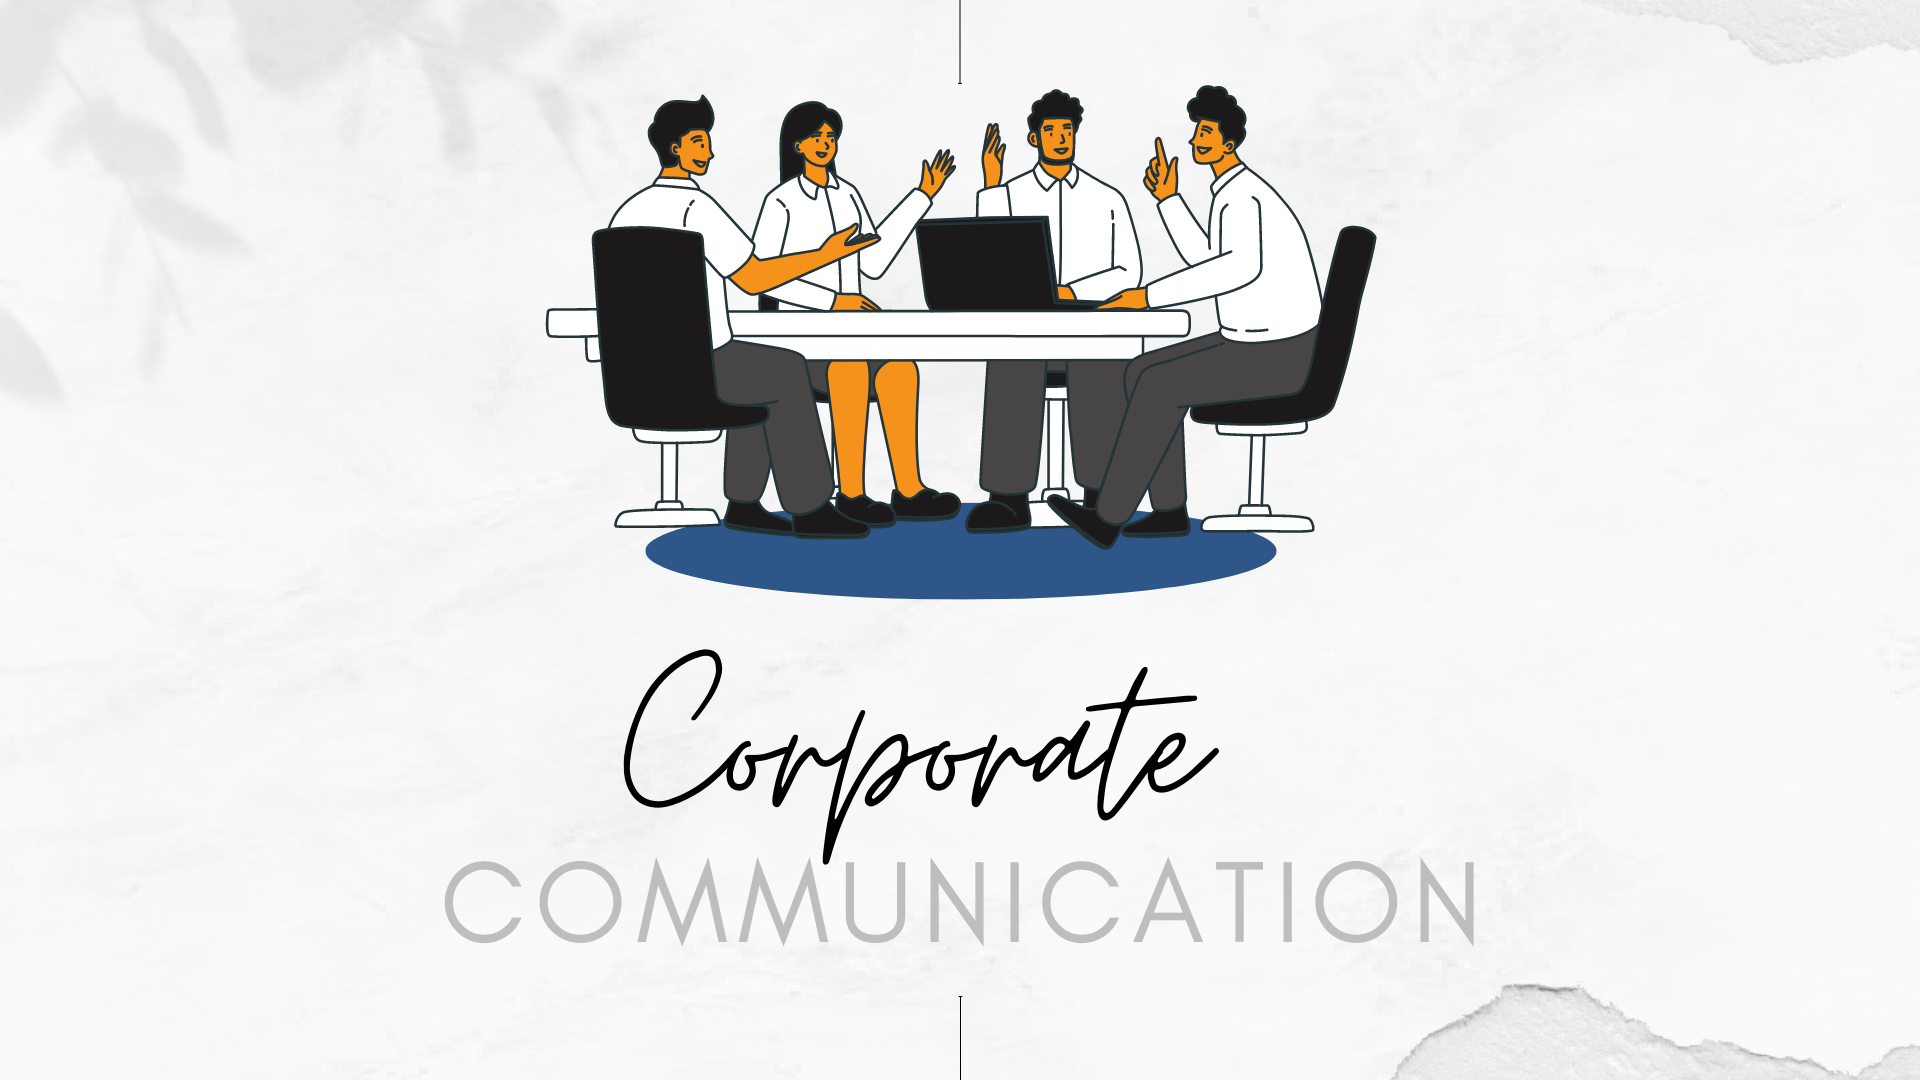 How to be a Good Corporate Communications Manager